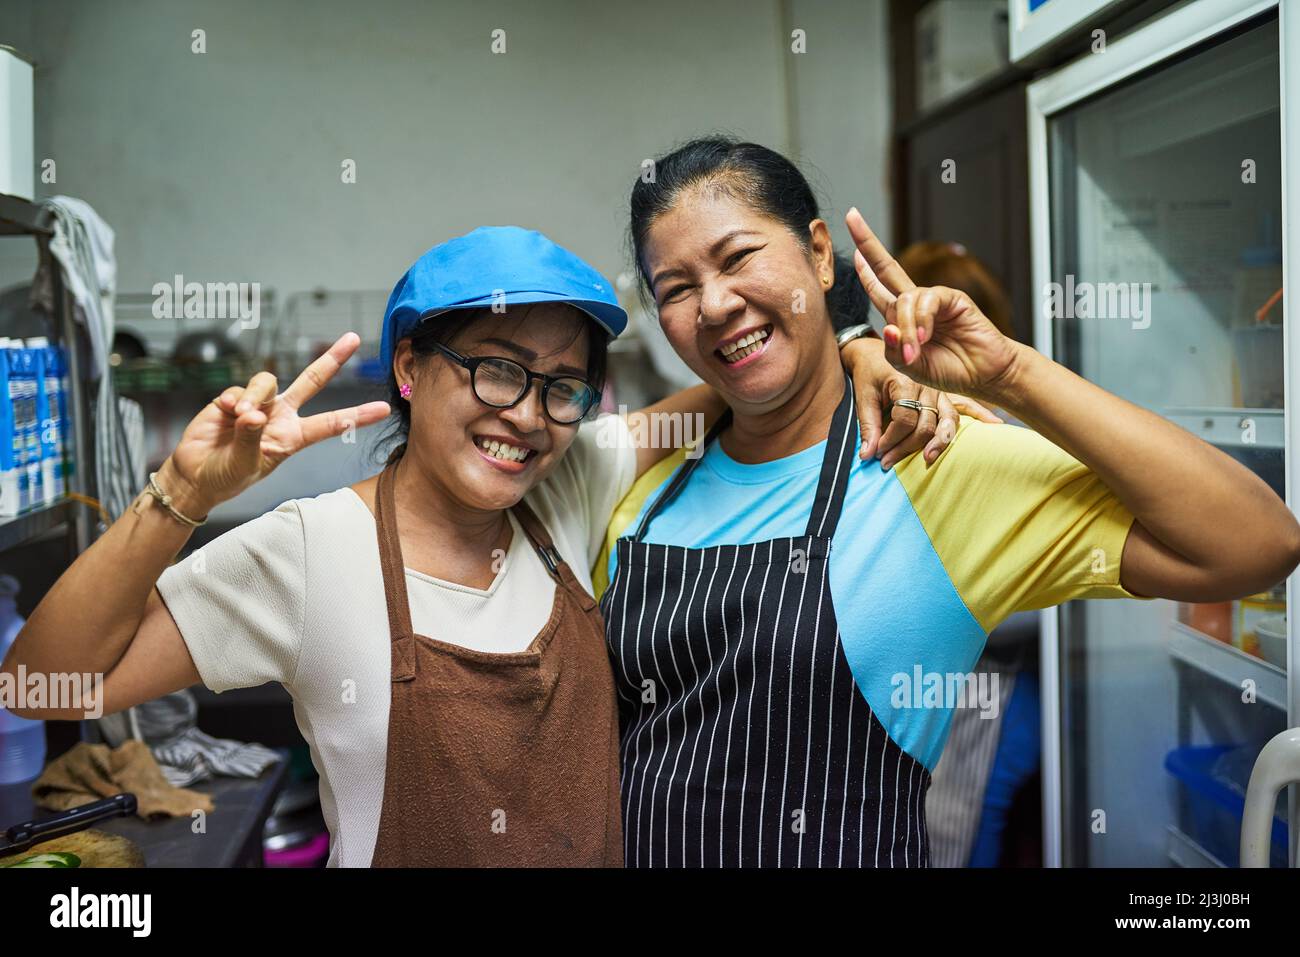 Kitchen buddies. Portrait of two happy cooks posing together in the kitchen. Stock Photo